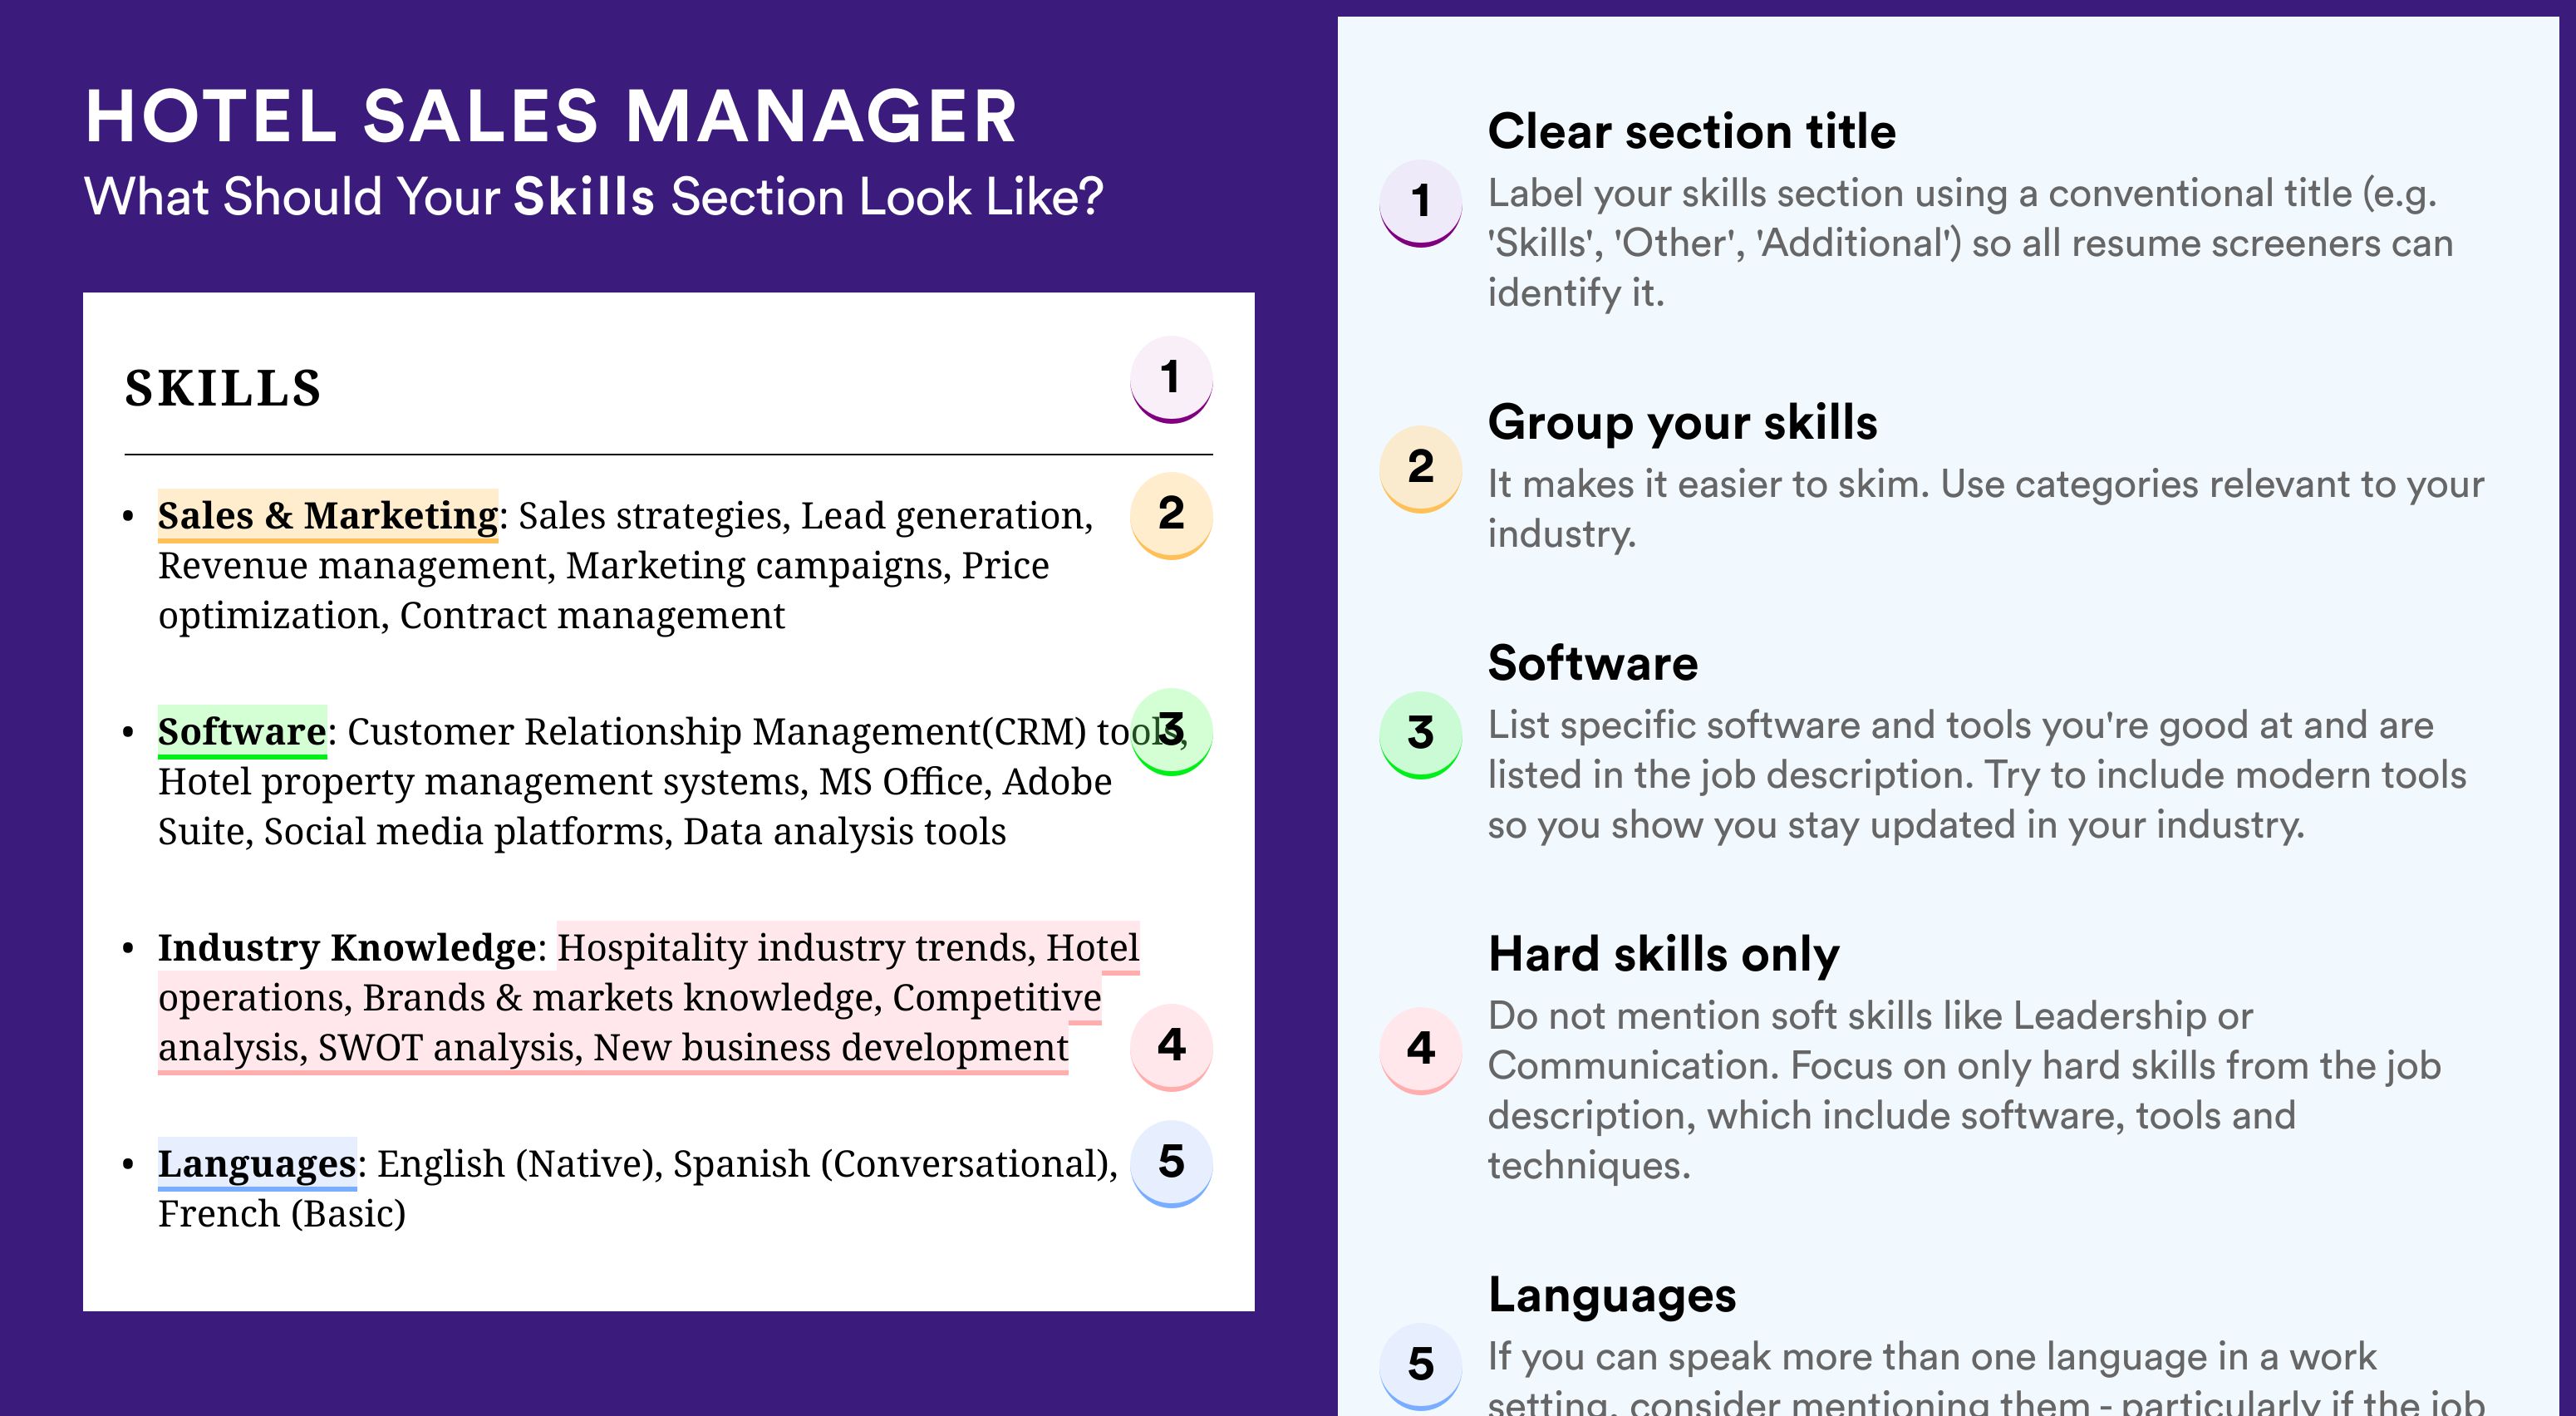 How To Write Your Skills Section - Hotel Sales Manager Roles